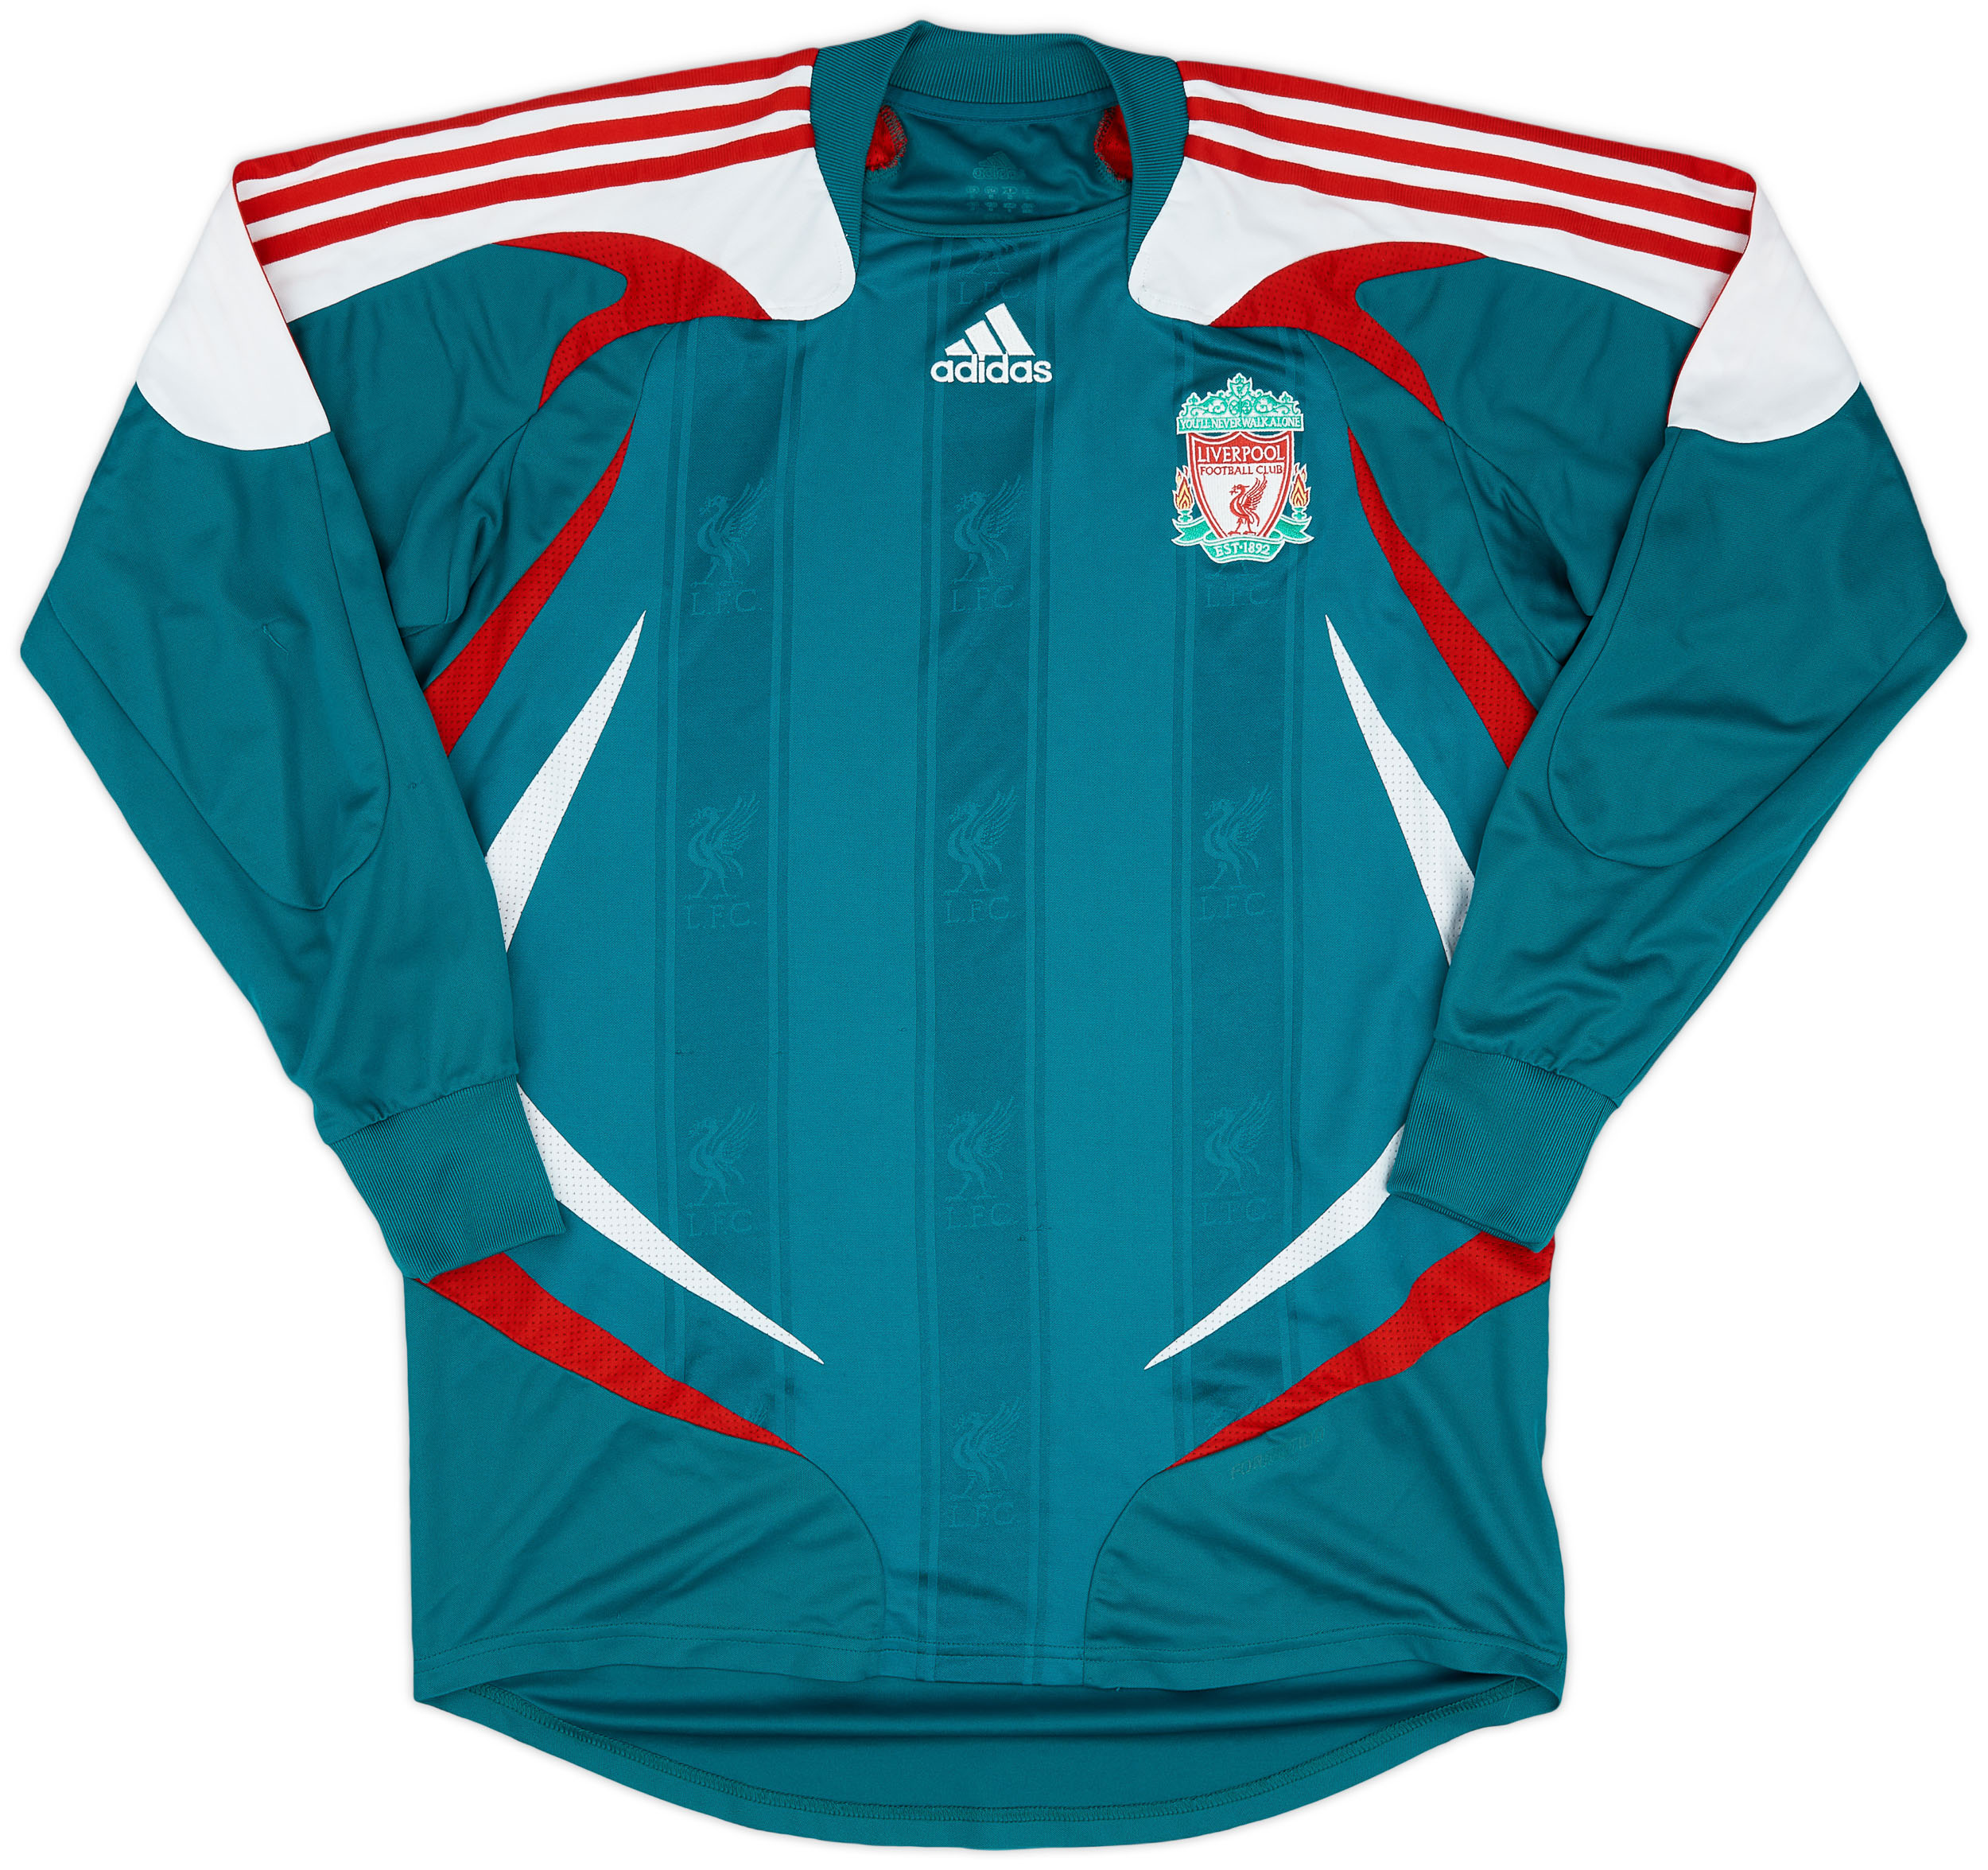 2007-08 Liverpool Player Issue GK Shirt - 8/10 - ()